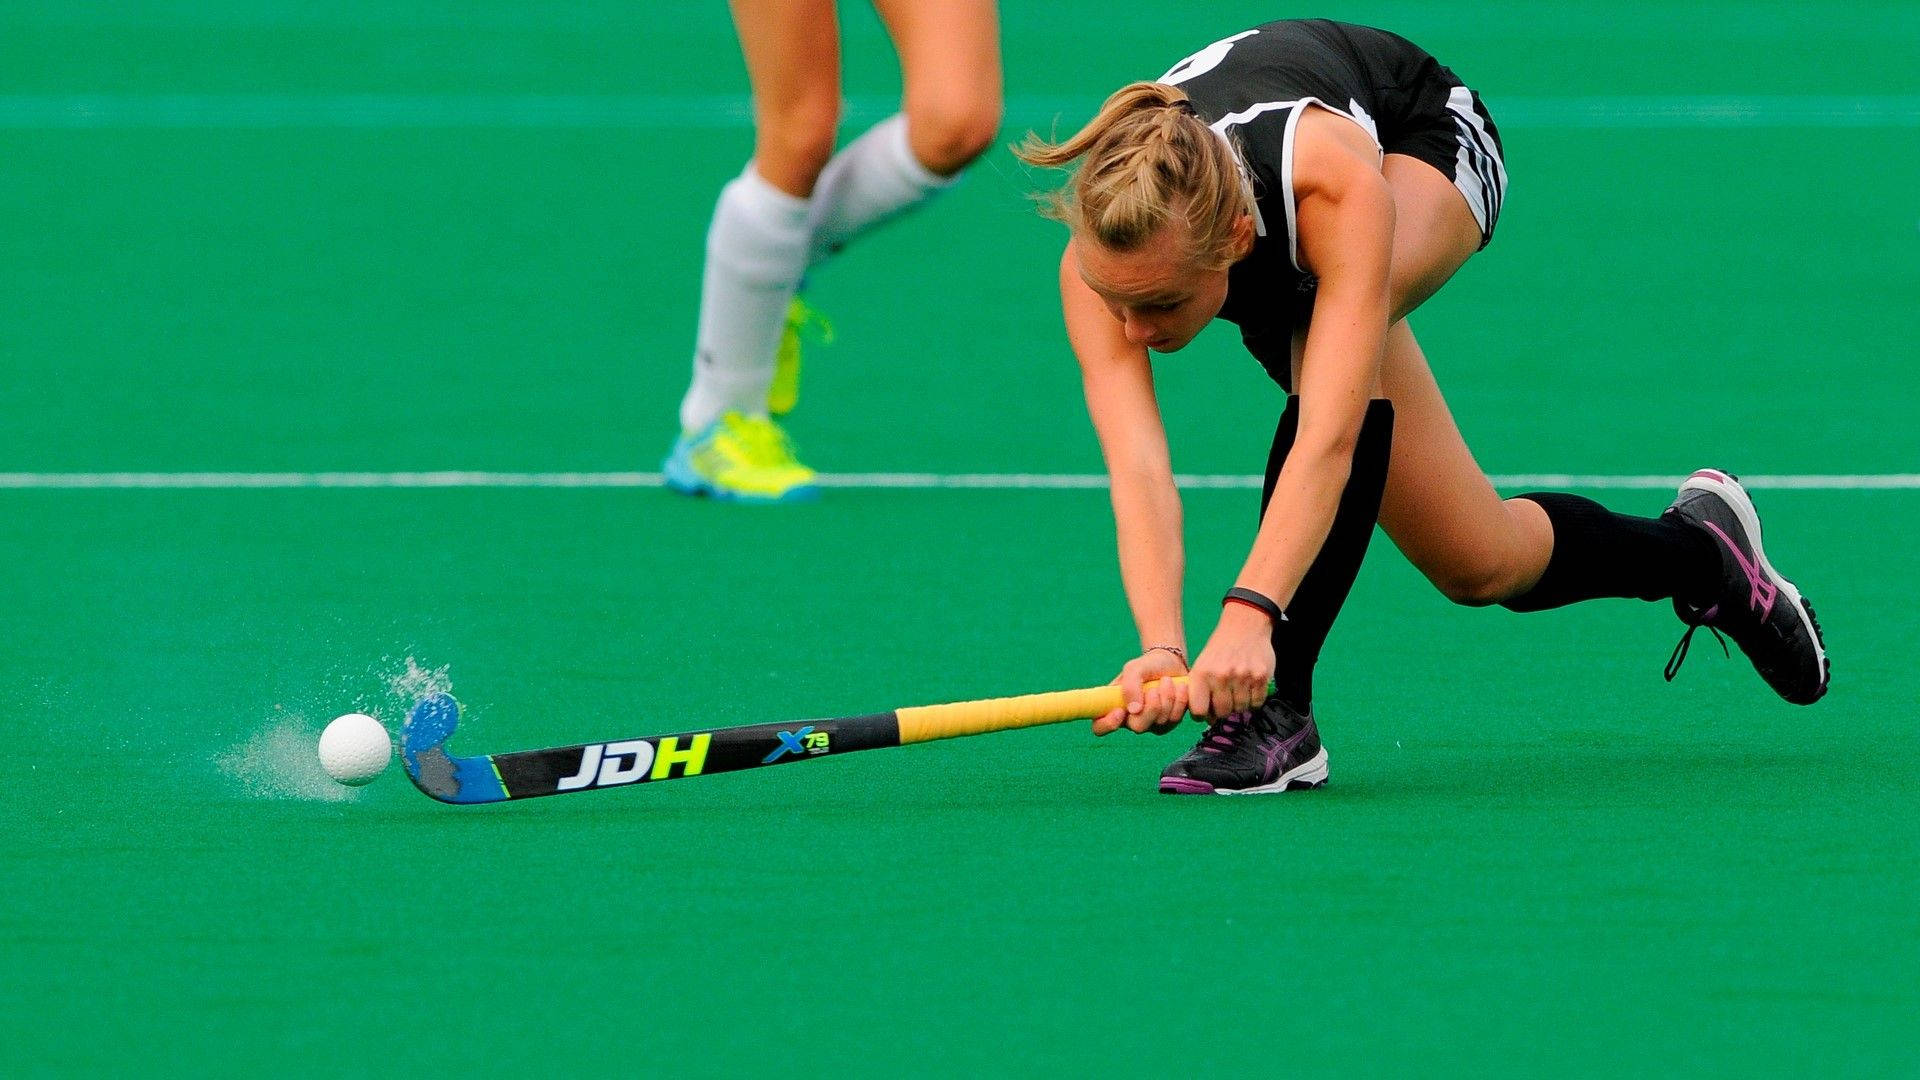 Dynamic Female Field Hockey Player in Action Wallpaper